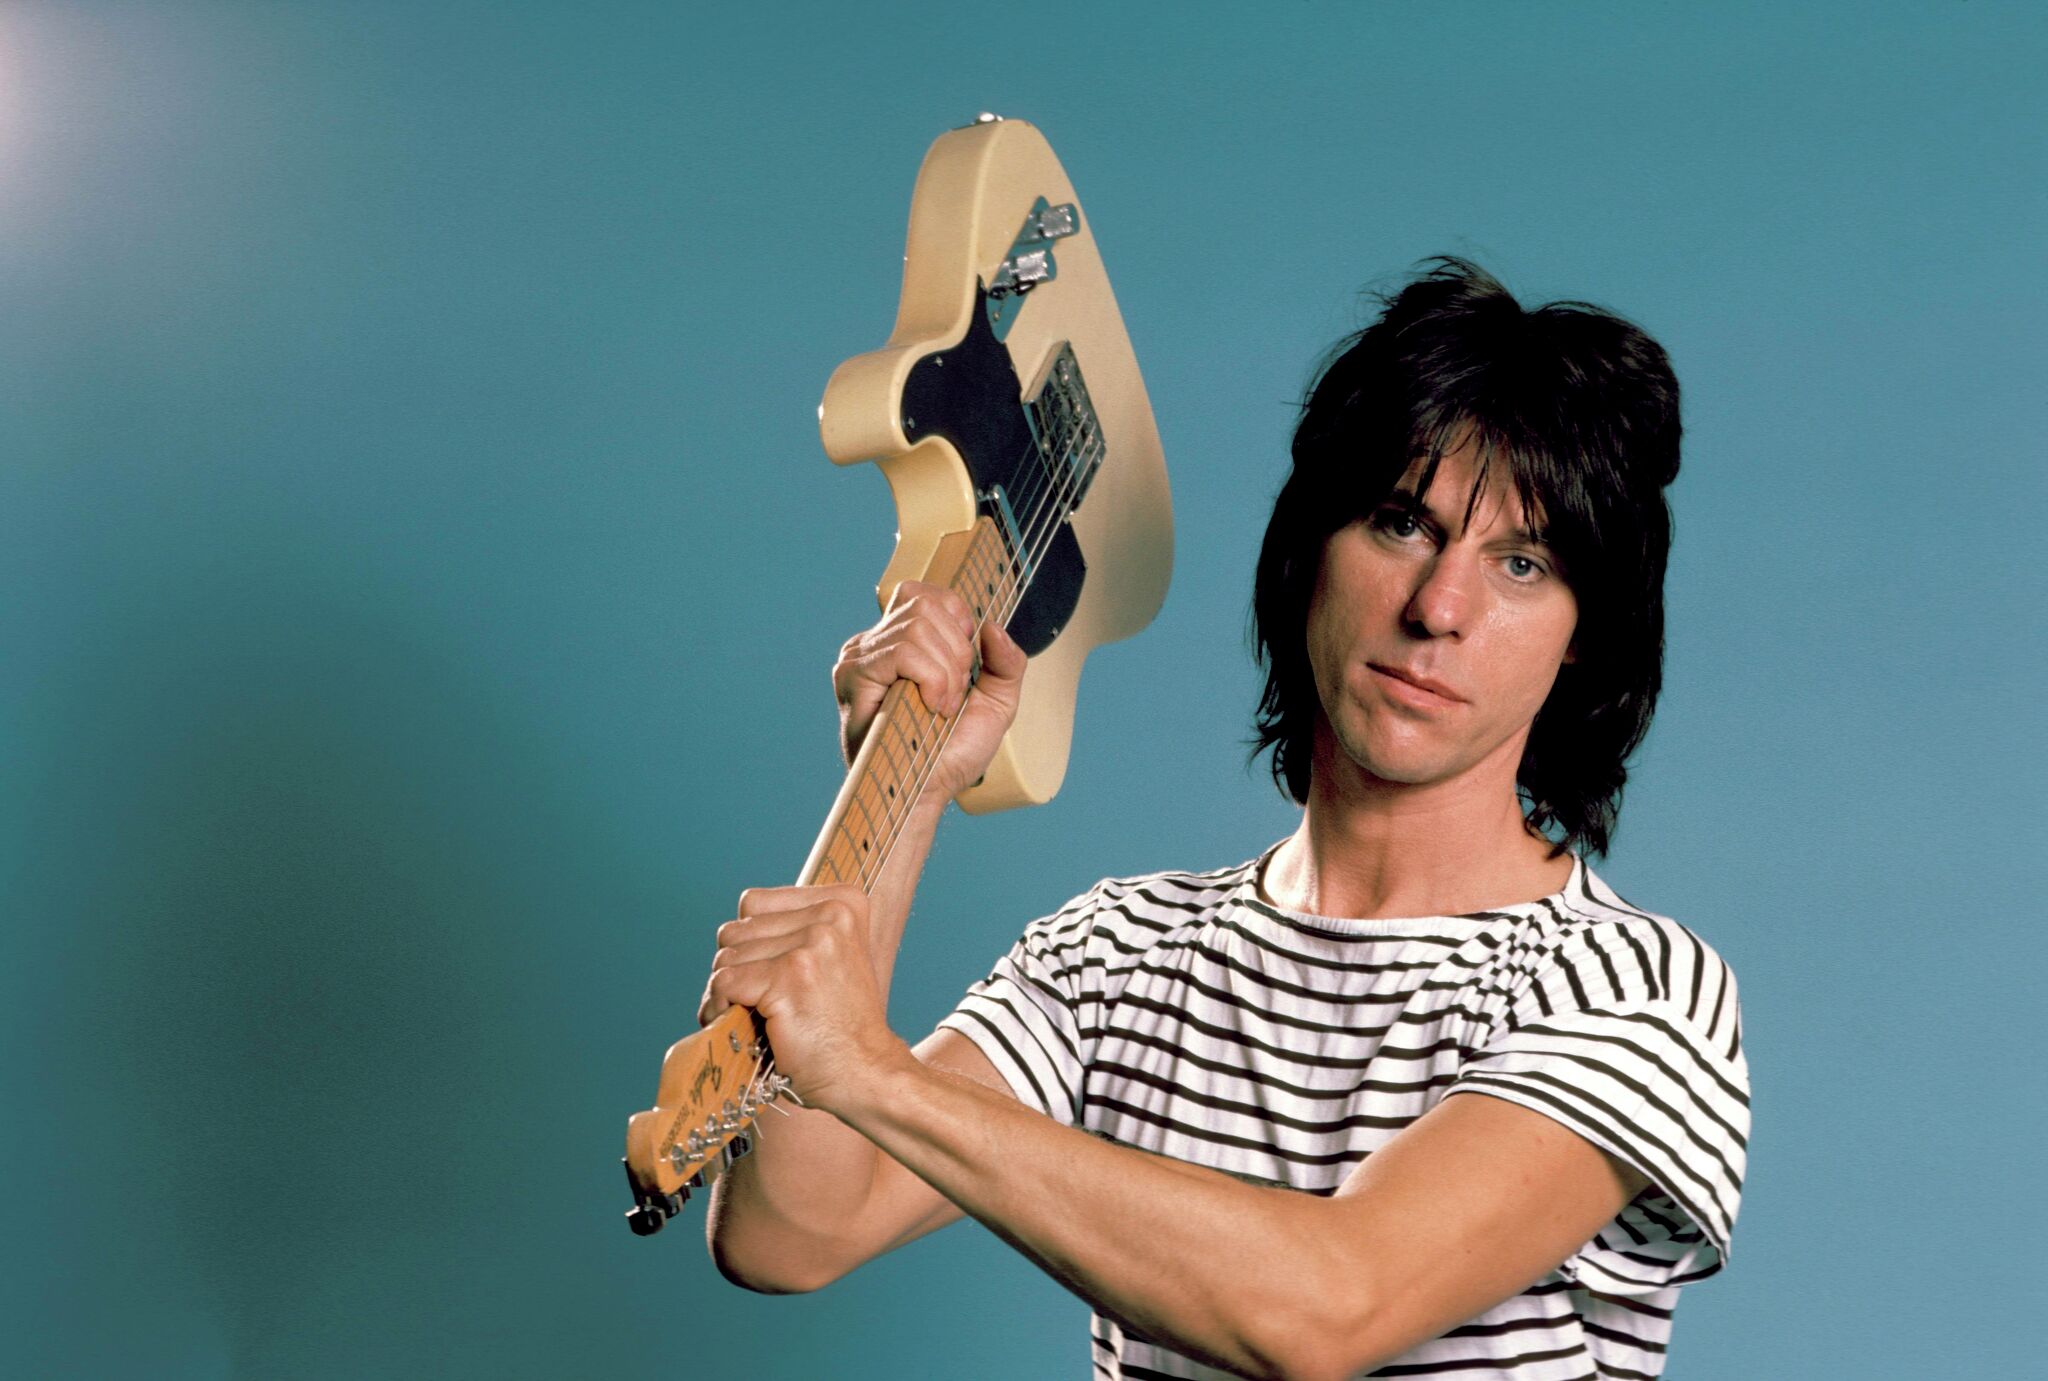 Musical legends pay tribute to guitarist Jeff Beck that died Tues